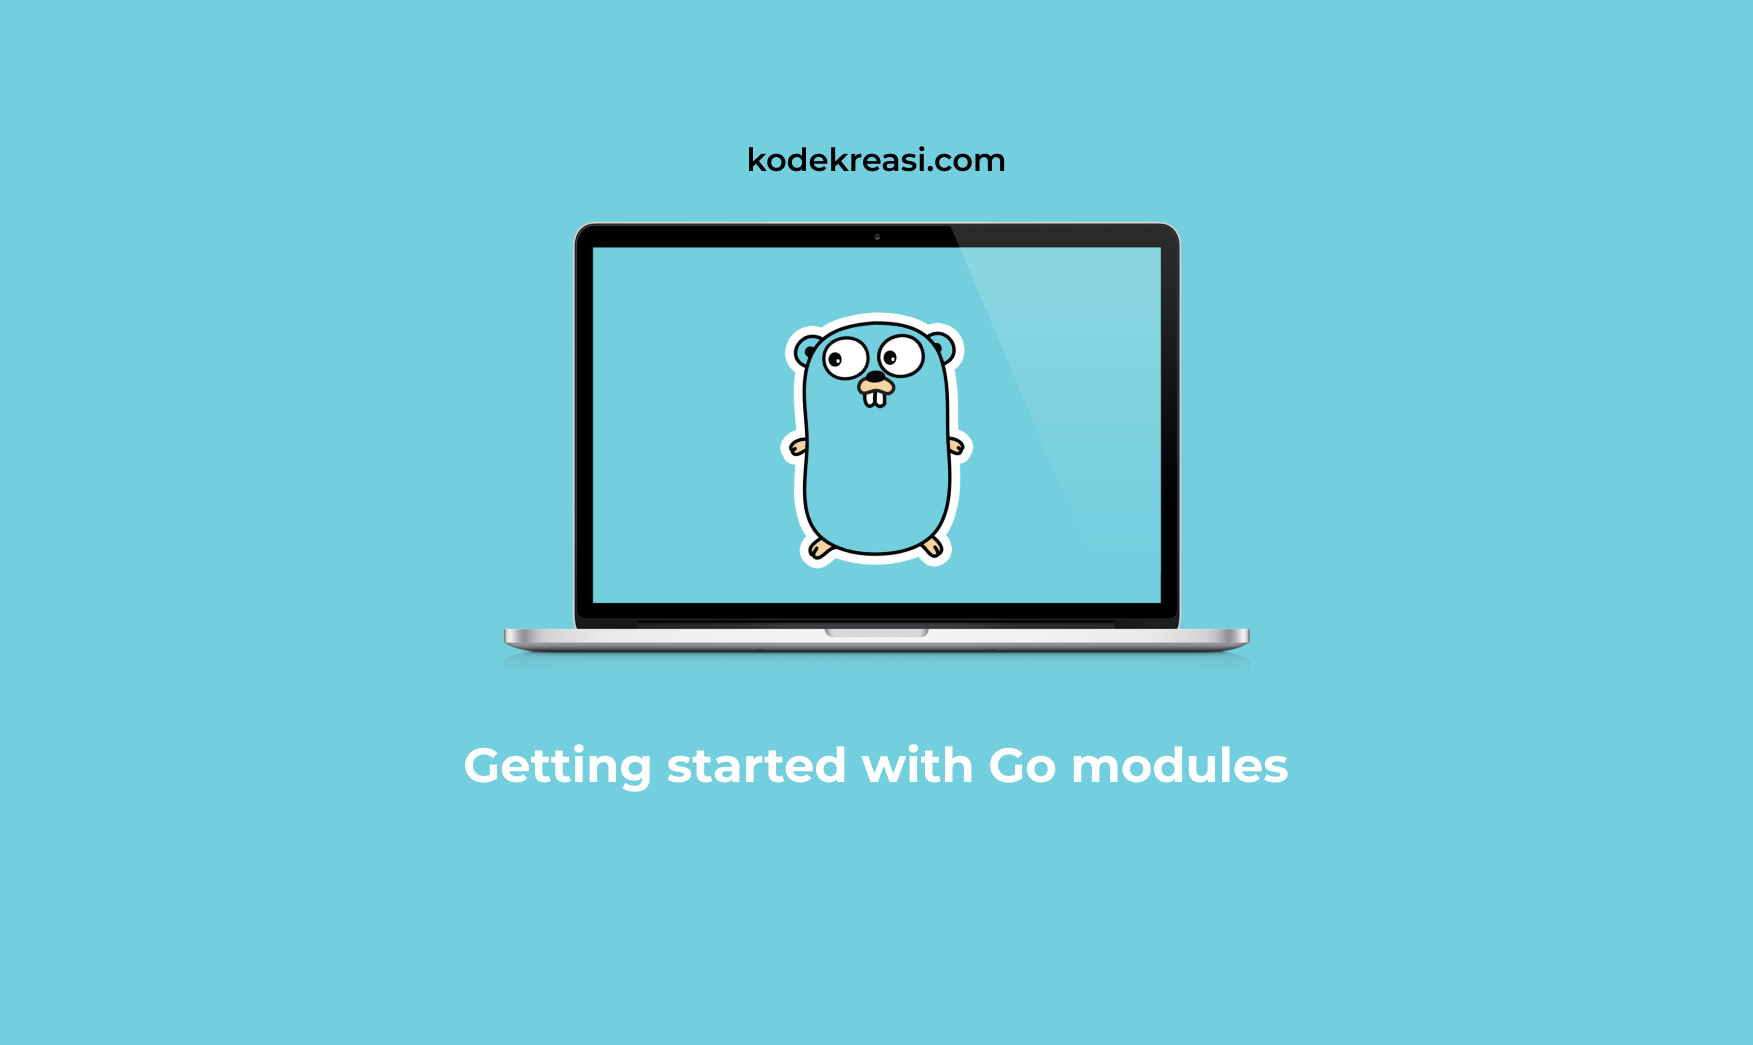 Getting started with Go modules